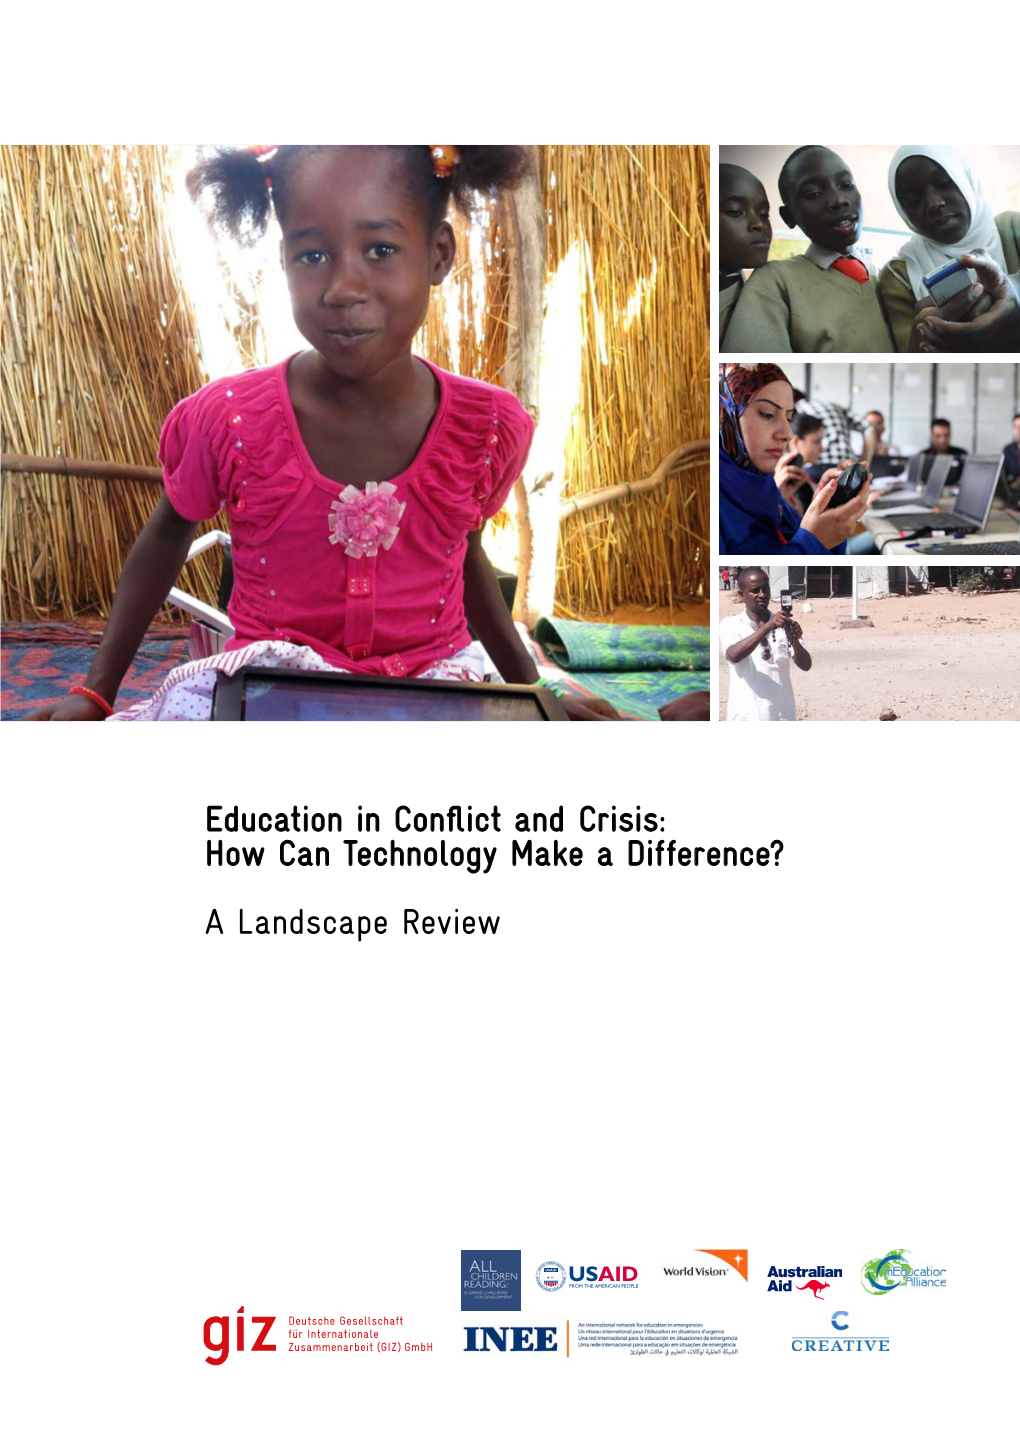 Education in Conflict and Crisis: How Can Technology Make a Difference